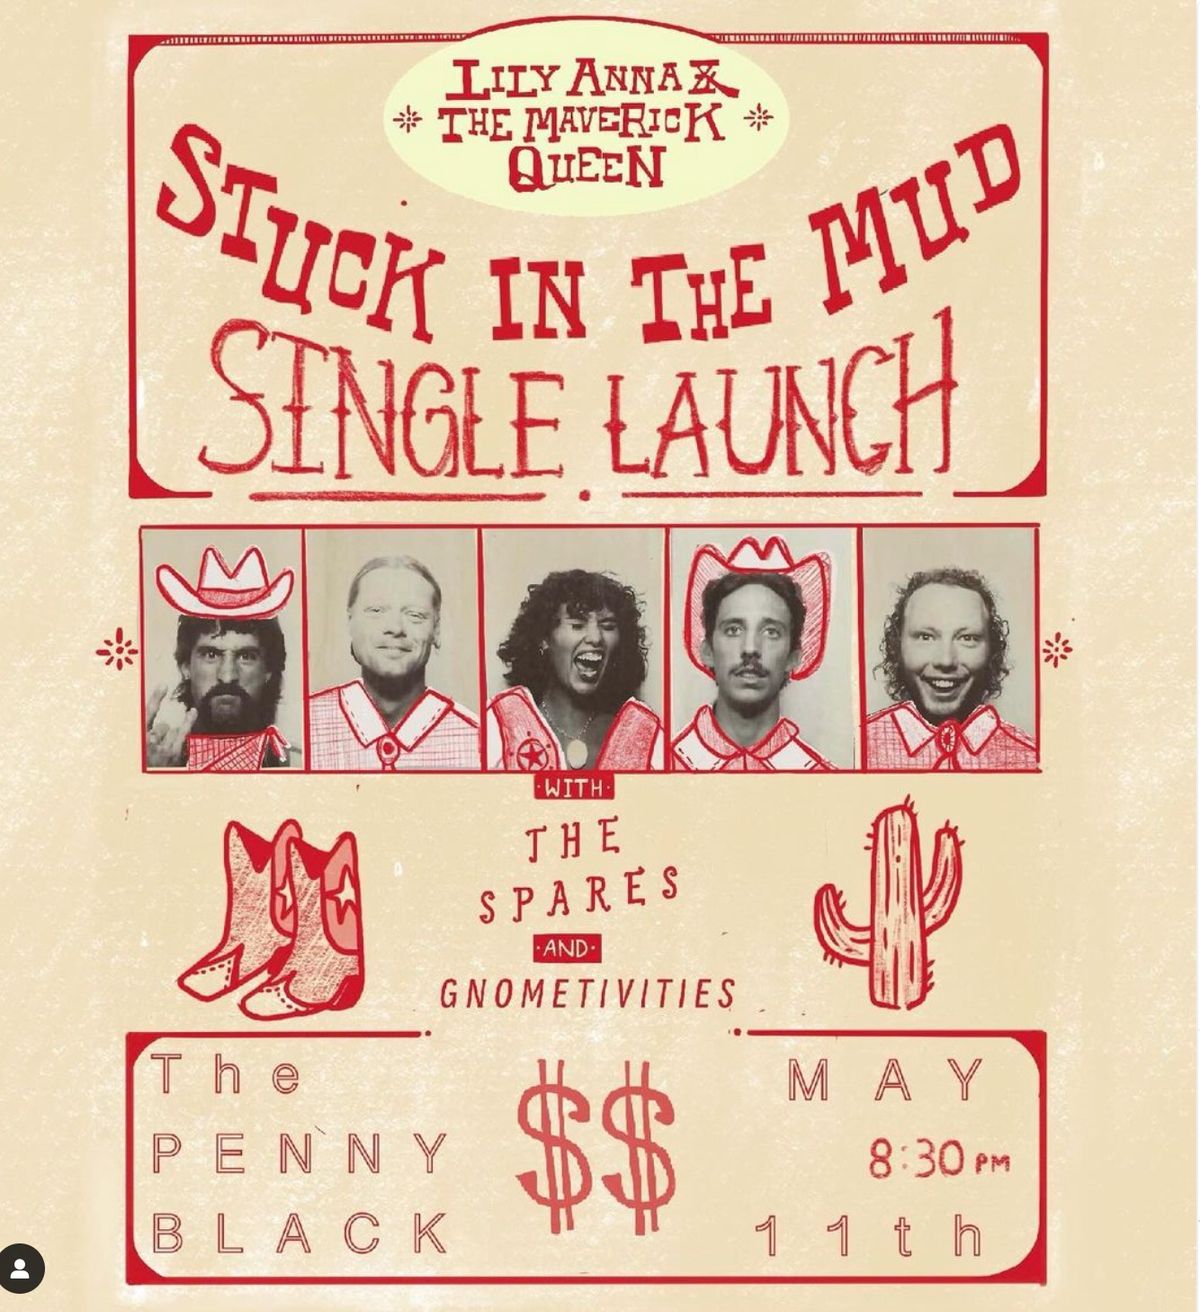  'STUCK IN THE MUD' SINGLE LAUNCH ~ LIVE AT THE PENNY BLACK